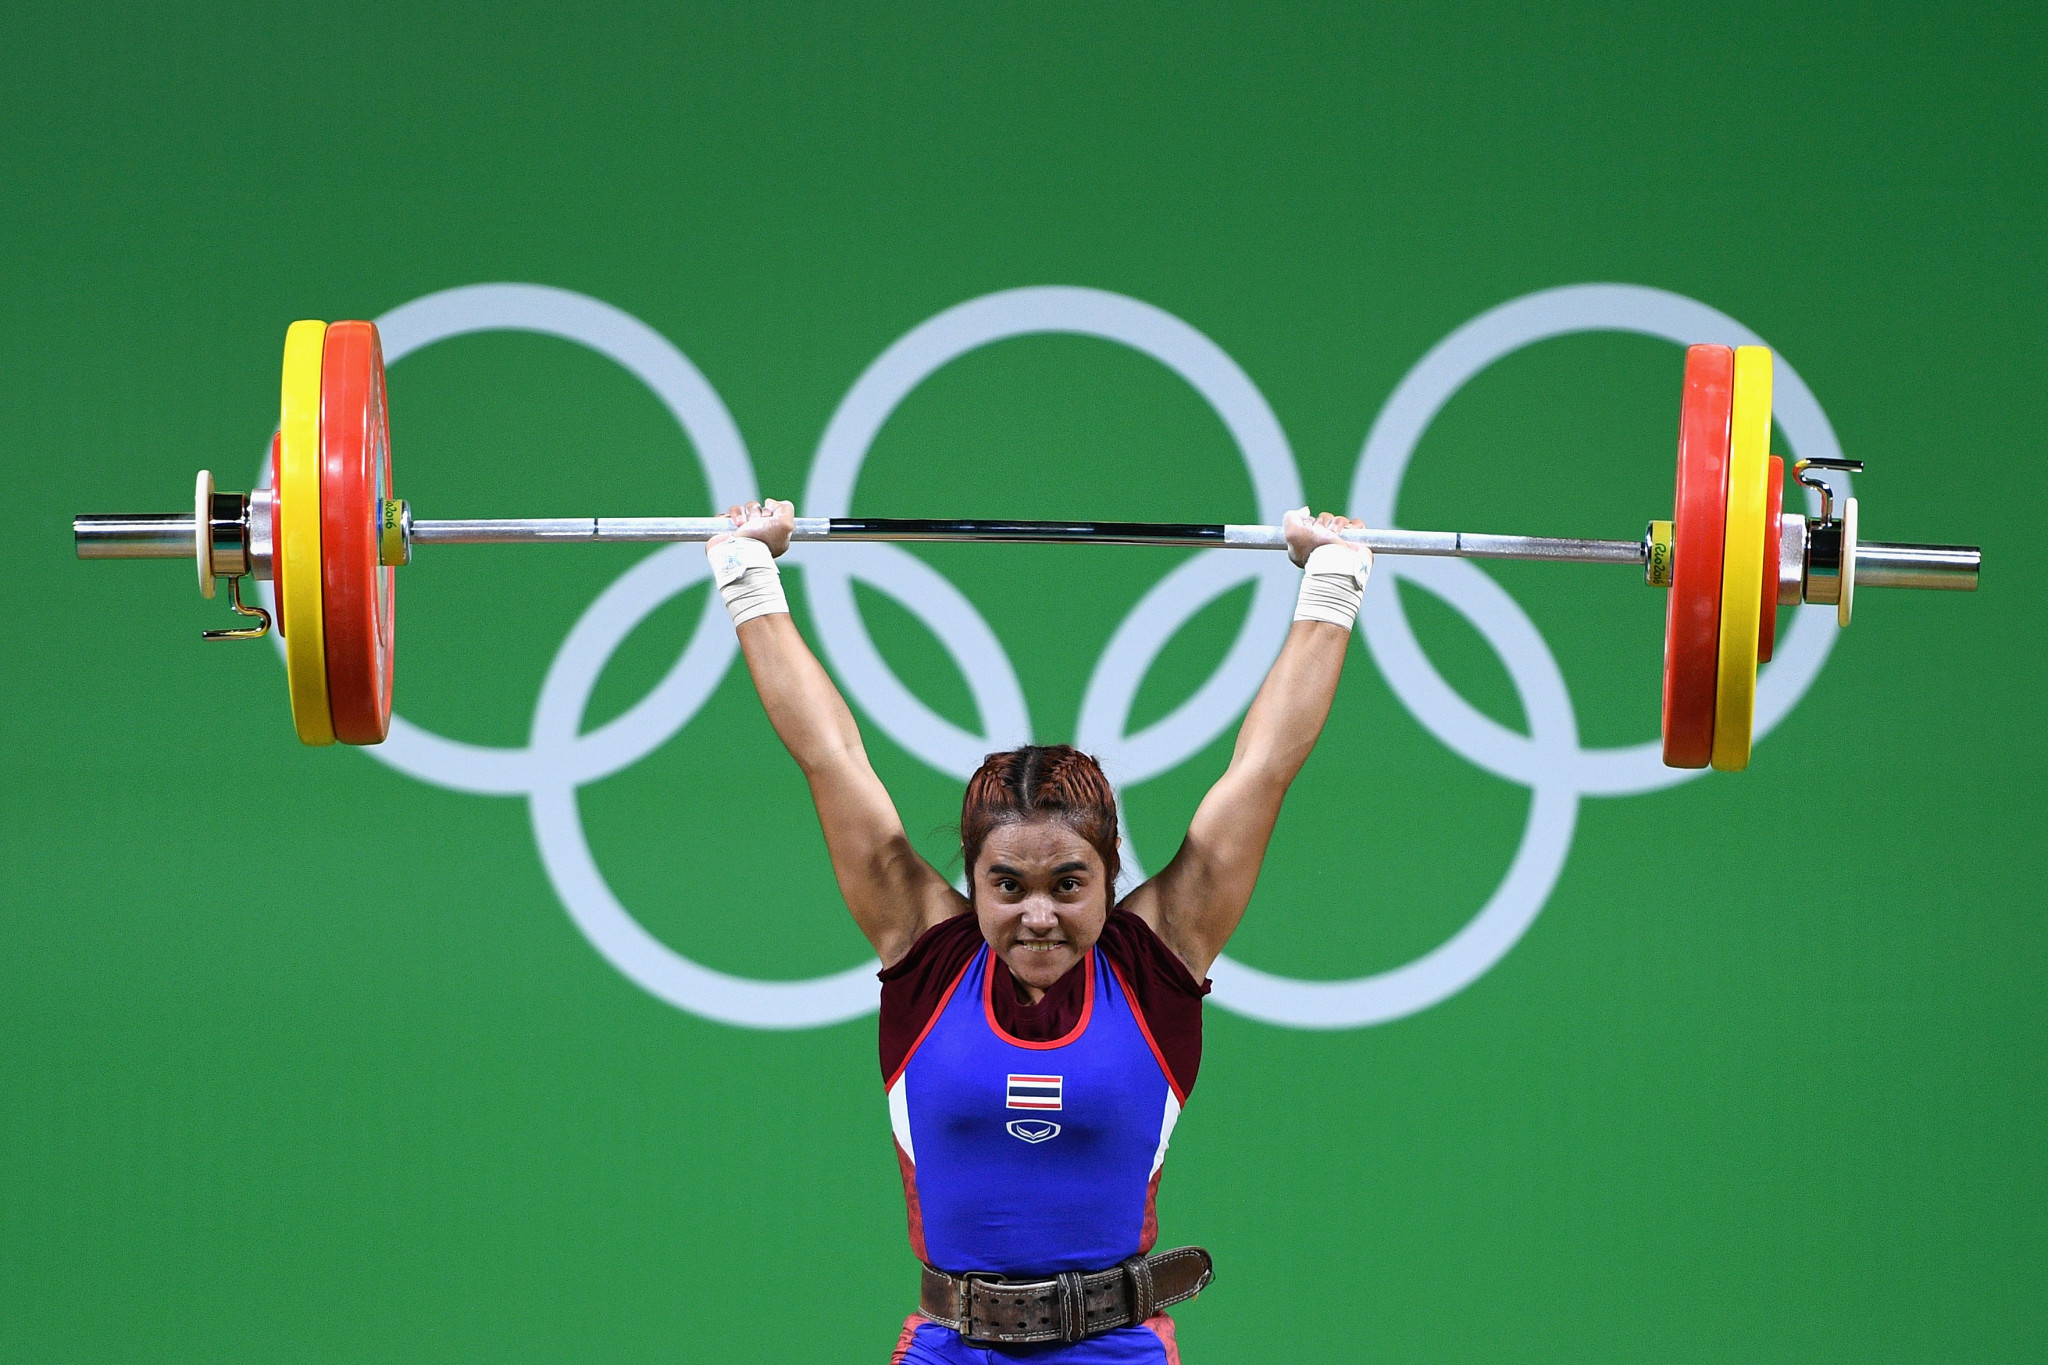 Sopita Tanasan is one of the high profile Thai weightlifters to have failed, putting the country's hosting of the World Championships in doubt ©Getty Images